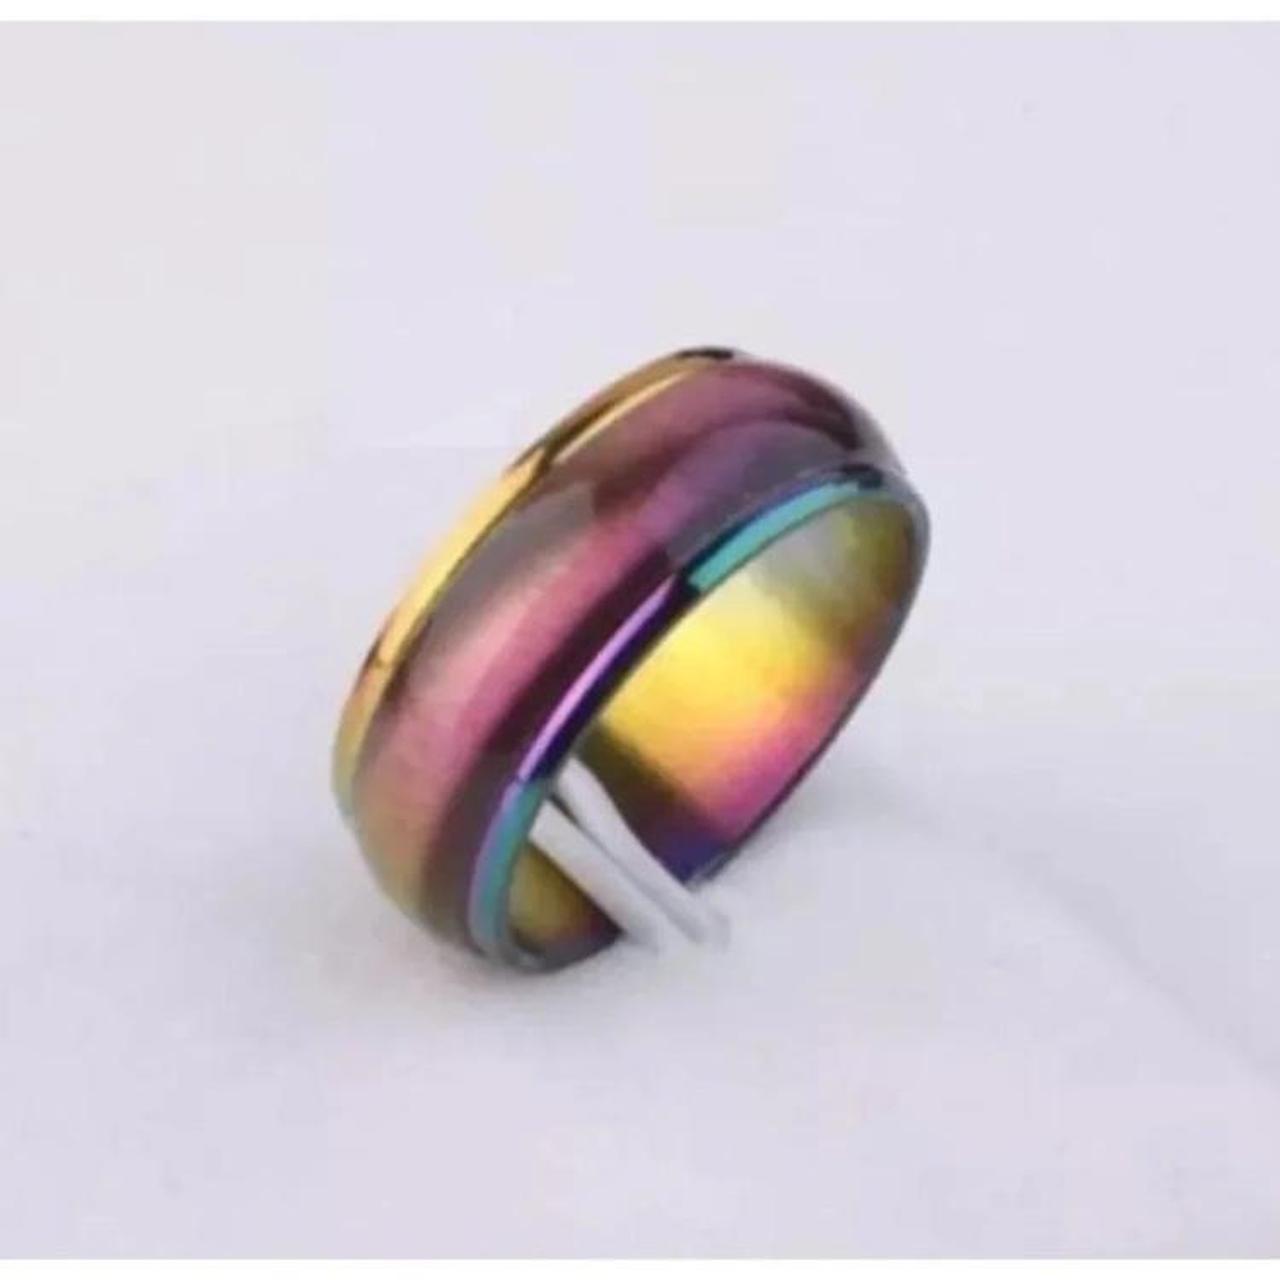 Product Image 1 - 6mm rainbow ring
Condition: 100% brand